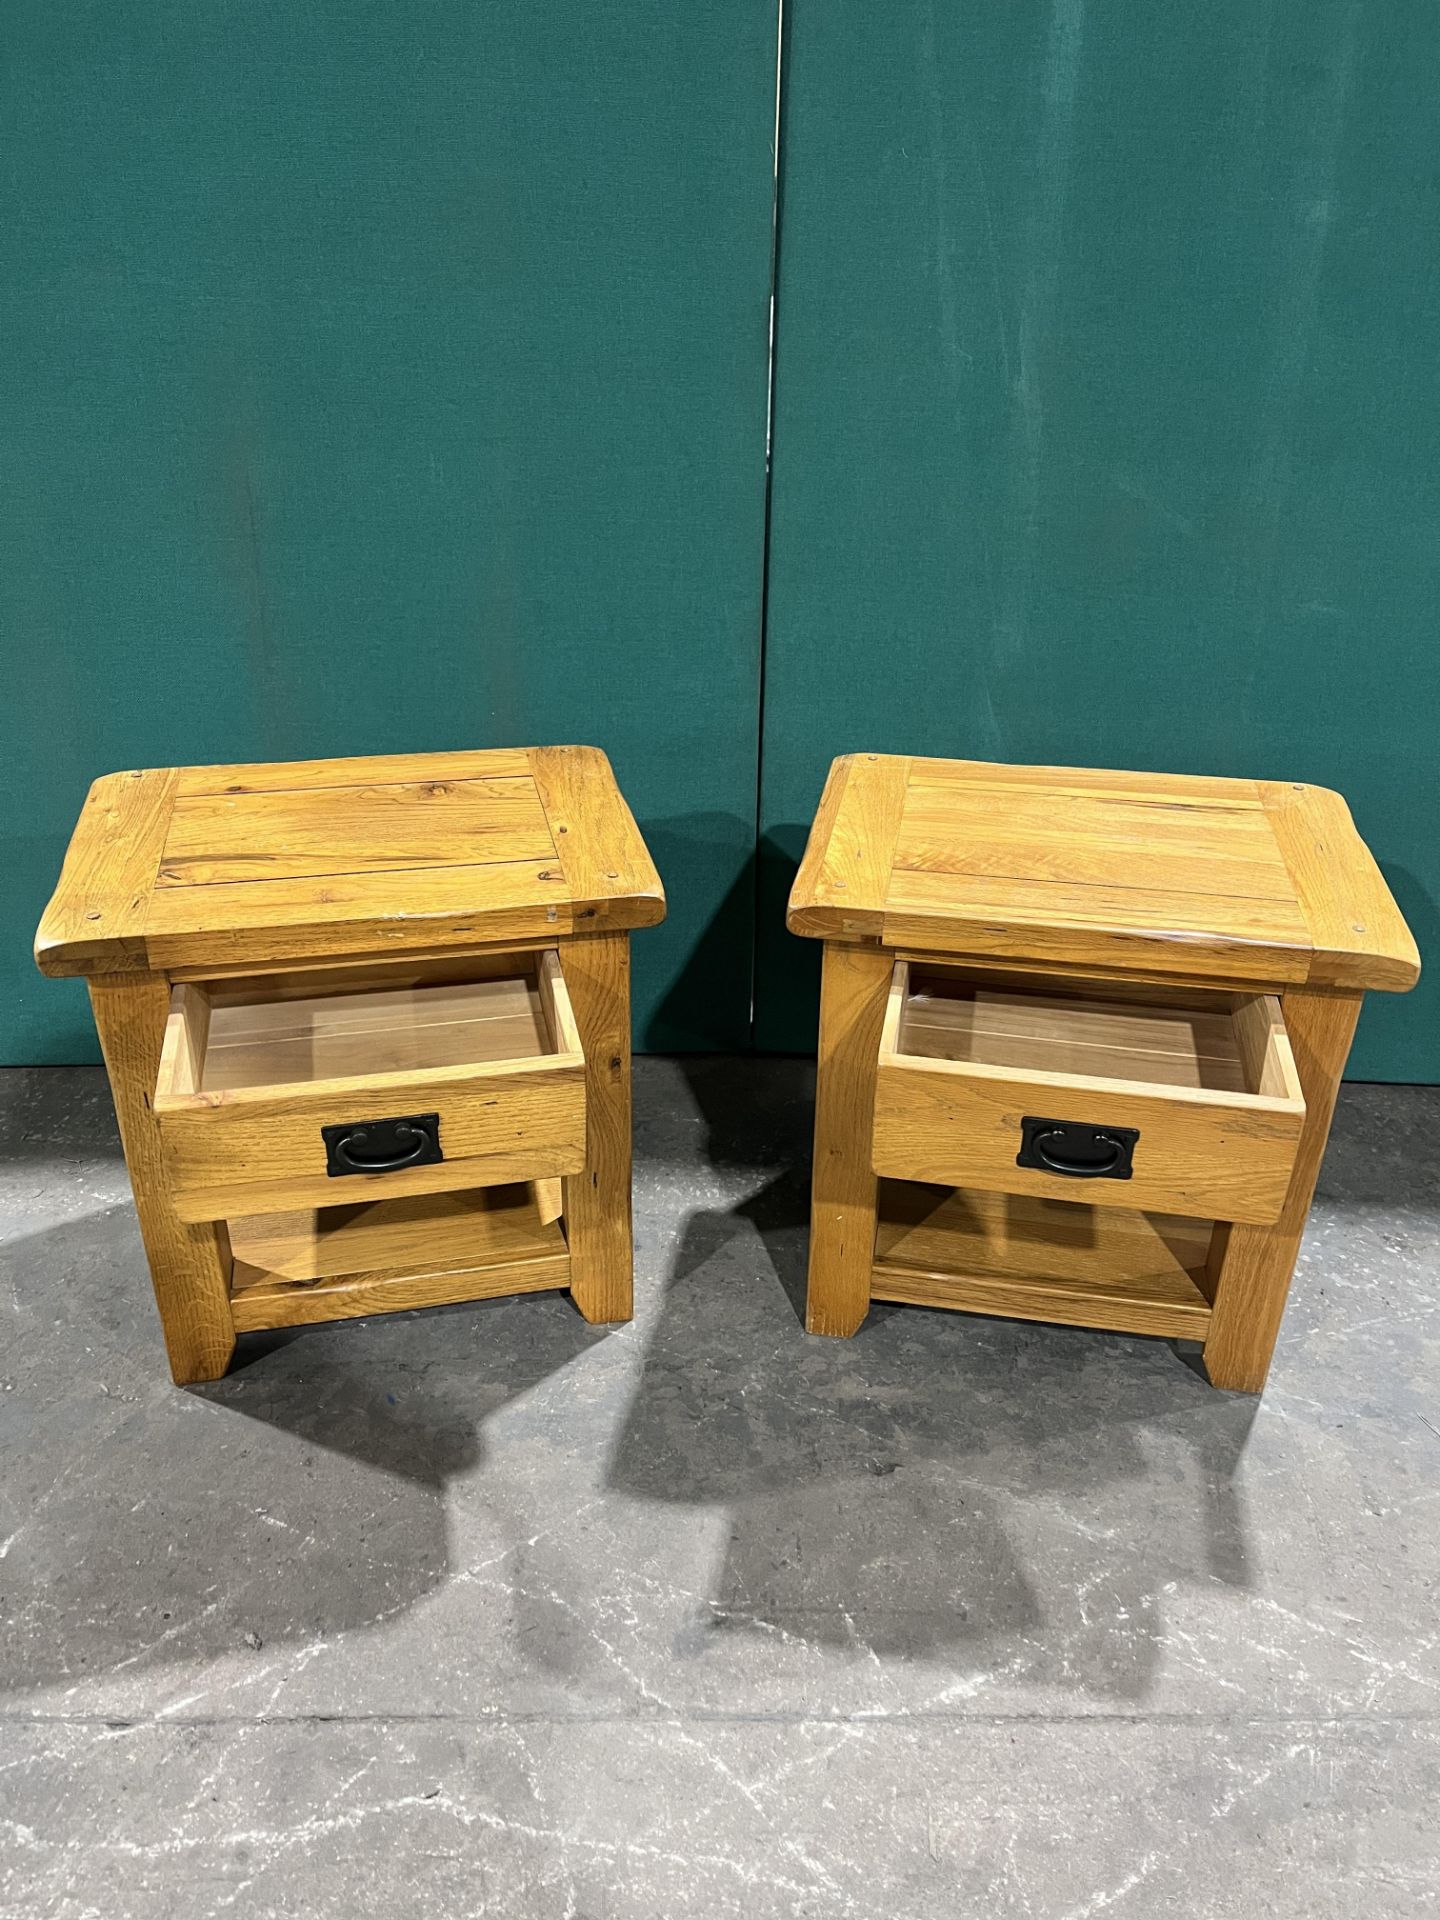 2 x Square Side Tables with Drawers - Image 2 of 3